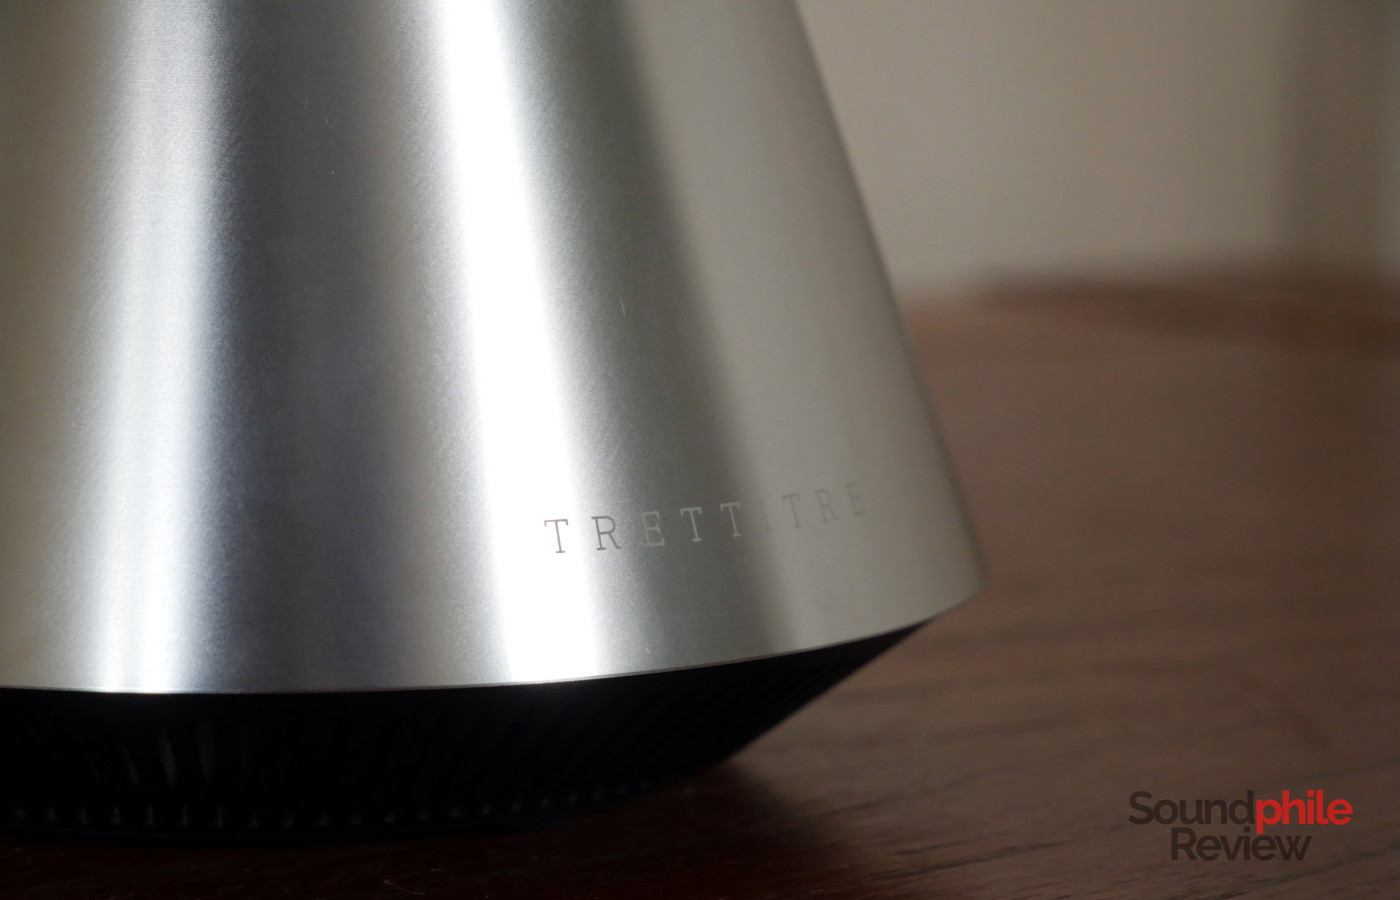 The company logo is laser-etched on the TRETTITRE TreSound Mini's metal body